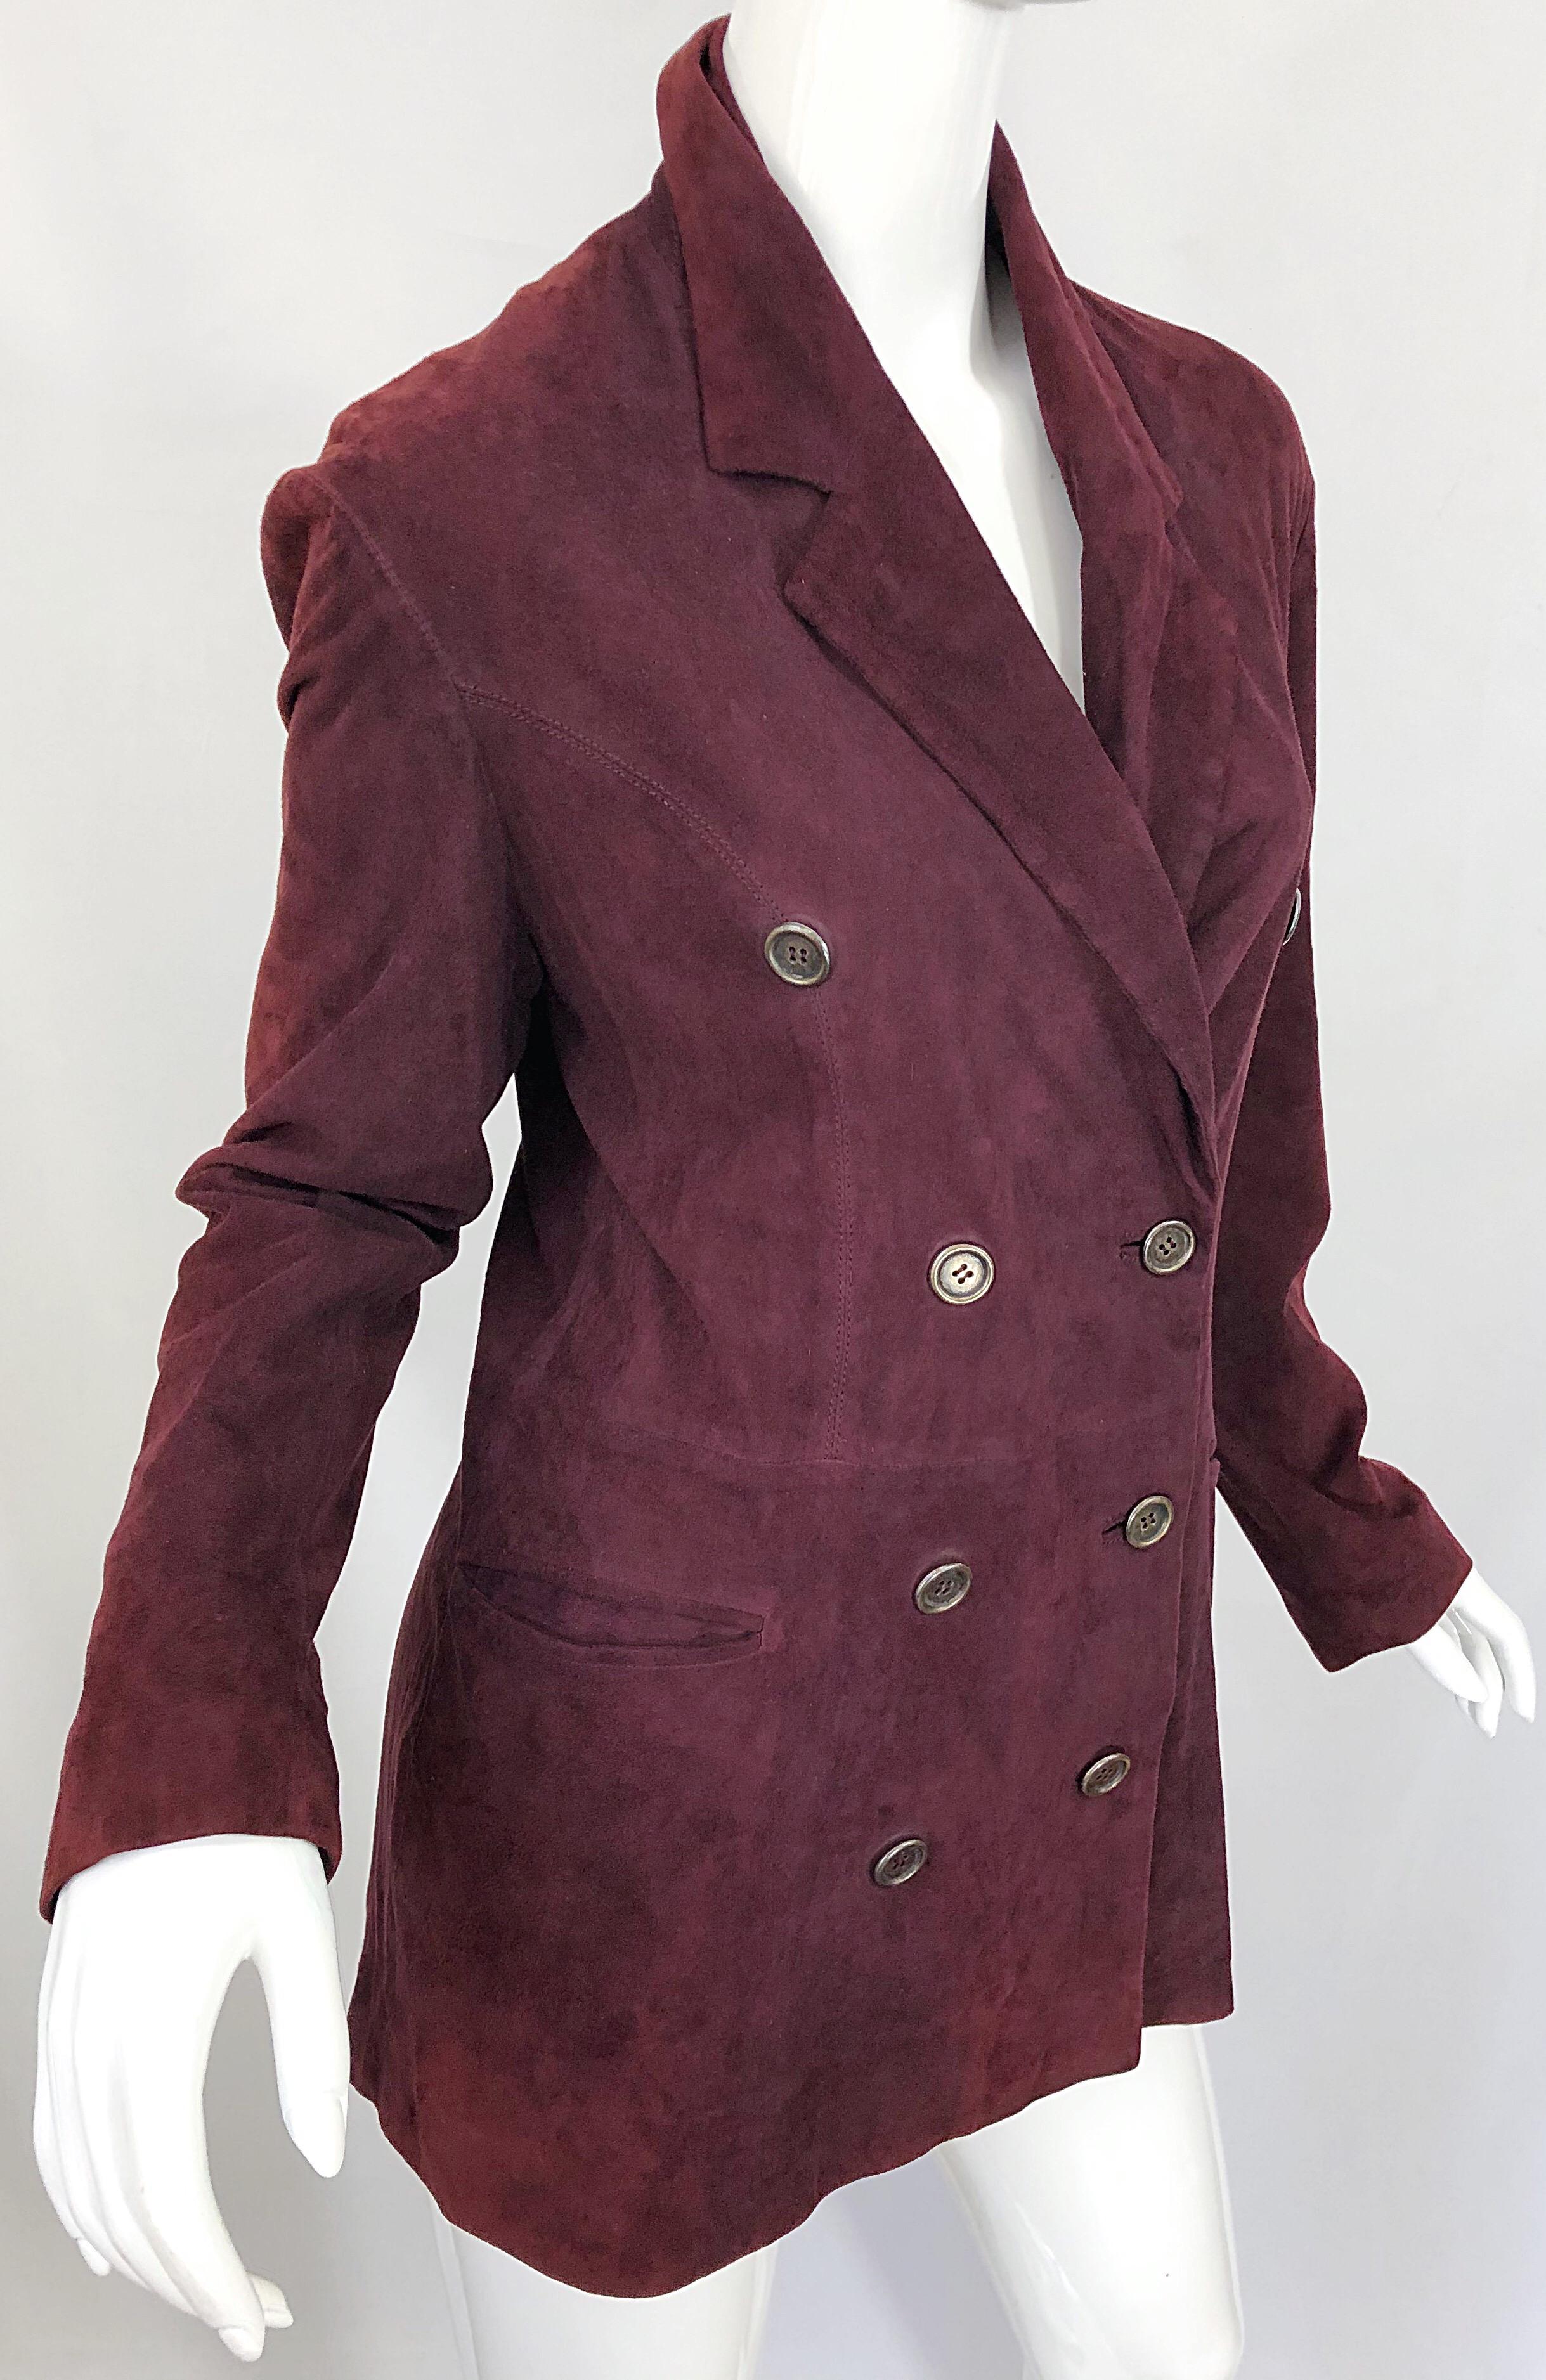 Ozbek 1990s Suede Leather Size 8 Burgundy Maroon Double Breasted Blazer Jacket For Sale 2